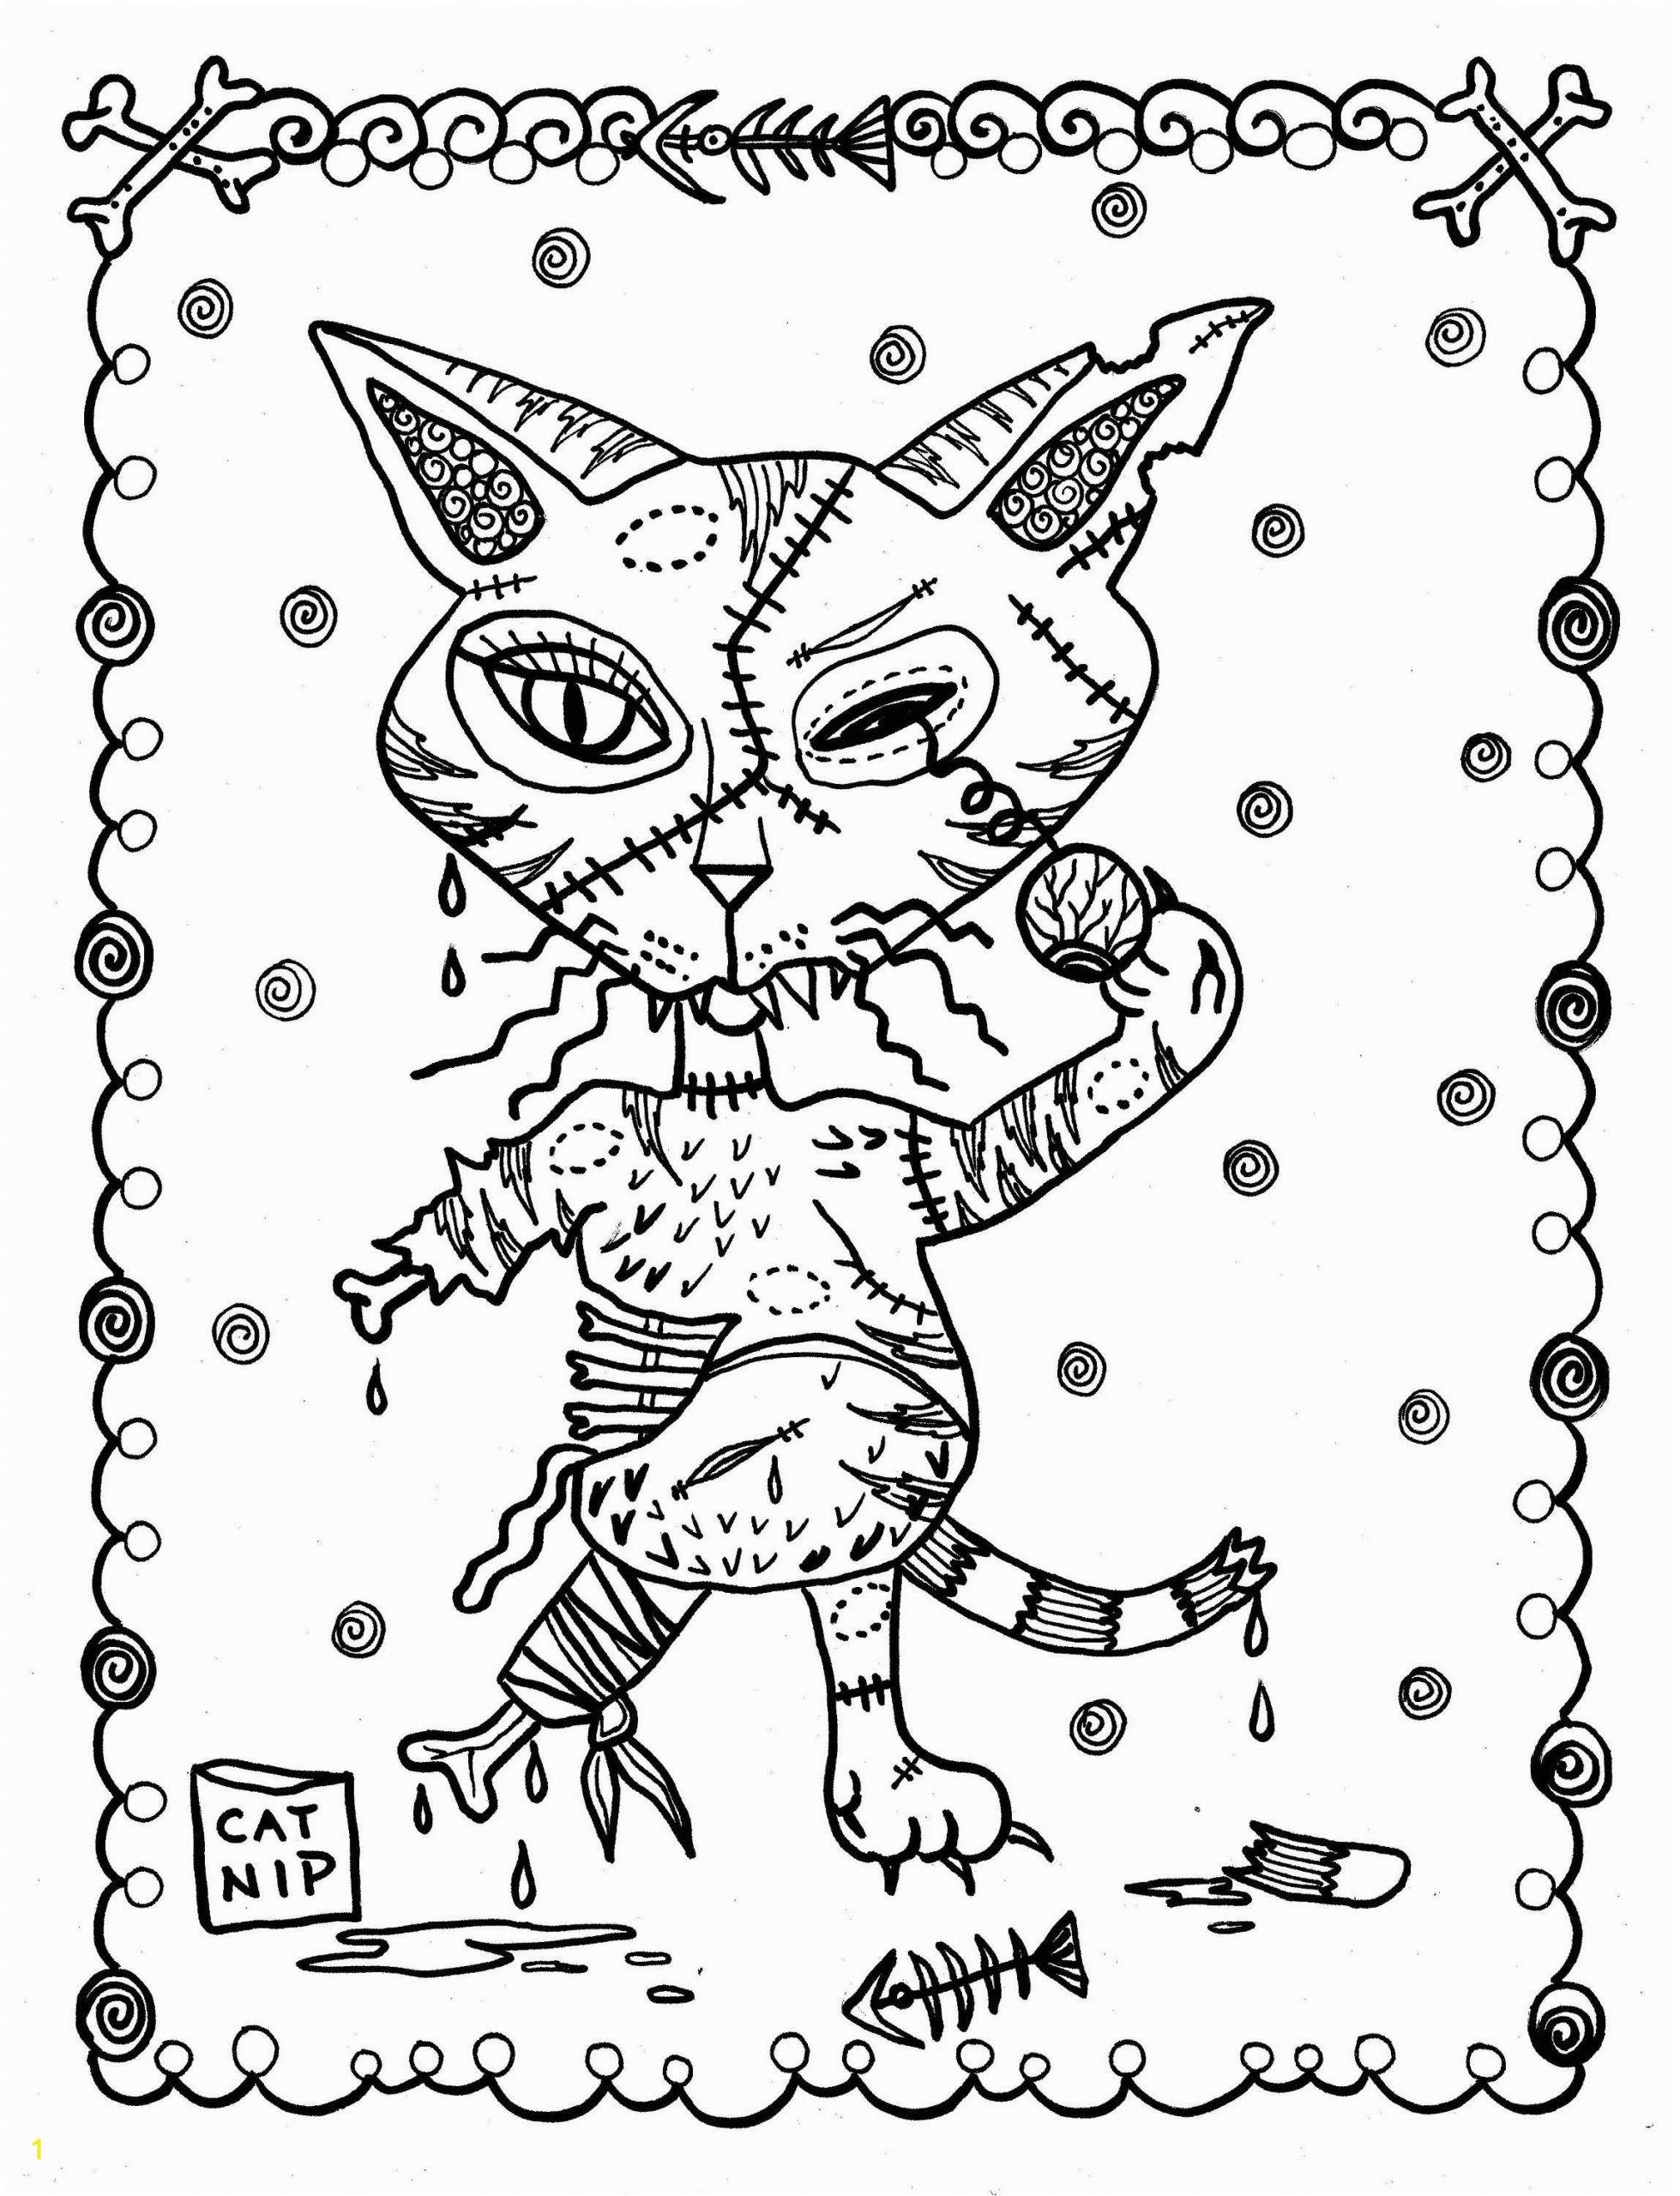 Halloween Dracula Coloring Pages 5 Pages Fantasy Cats Instant S Scarry Halloween